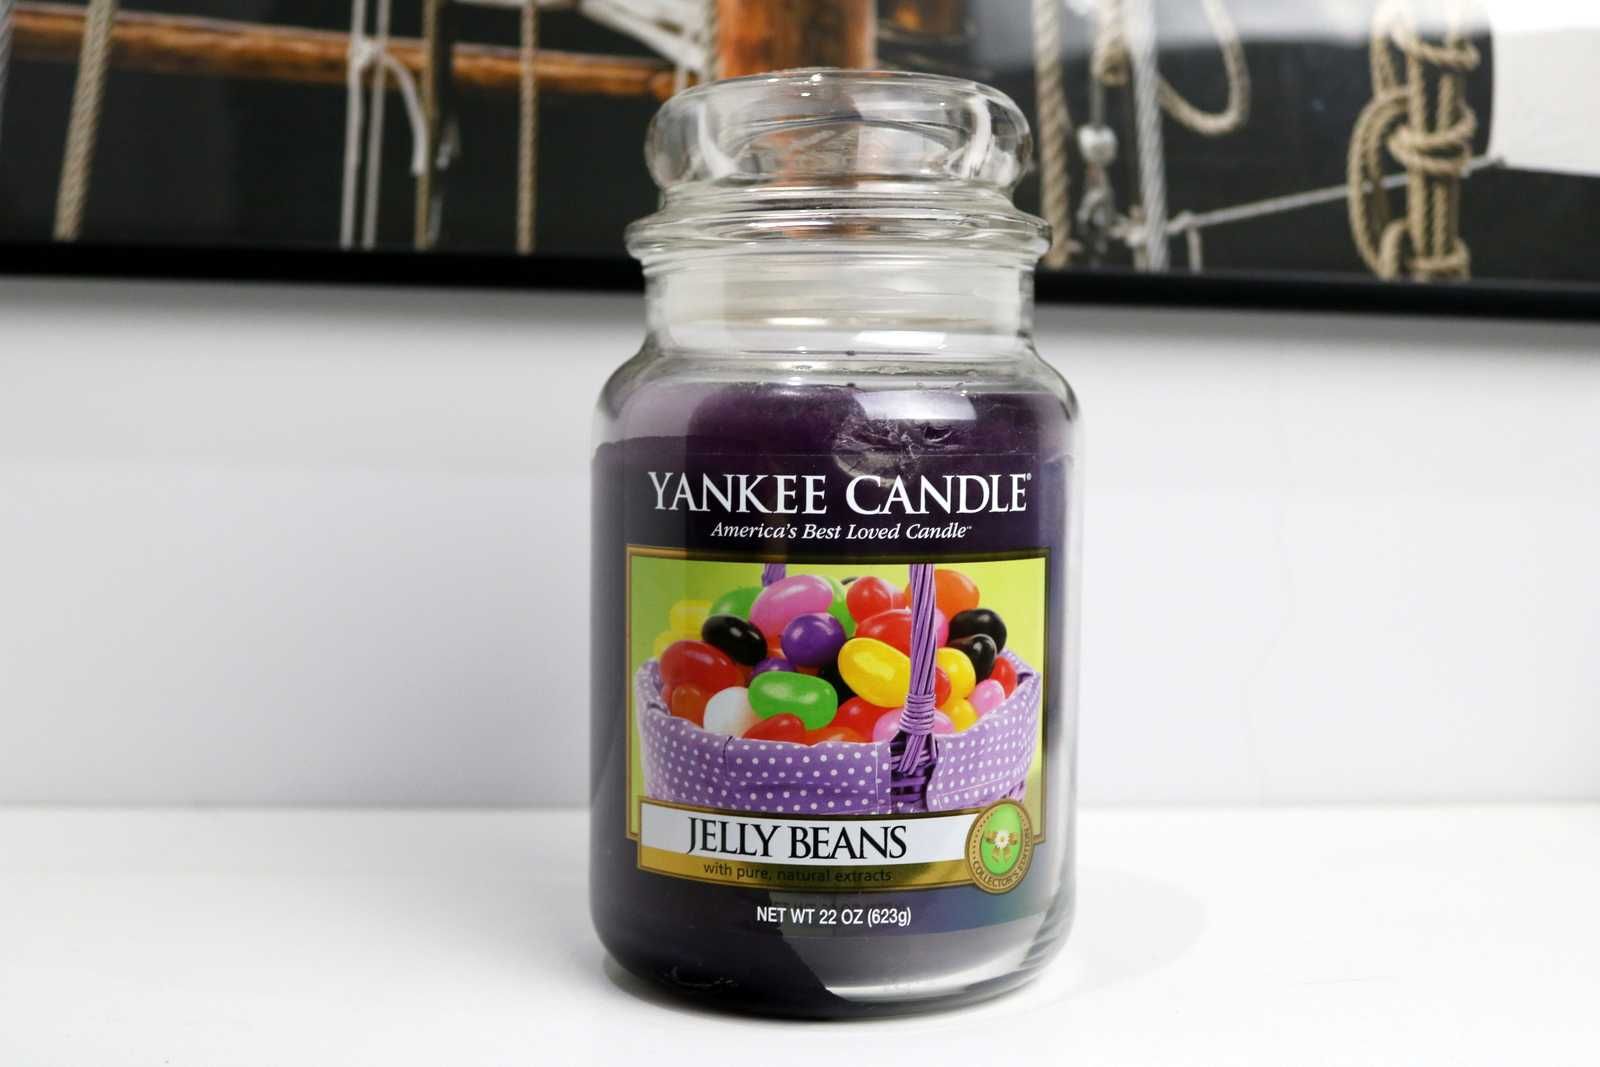 Jelly Beans Yankee Candle